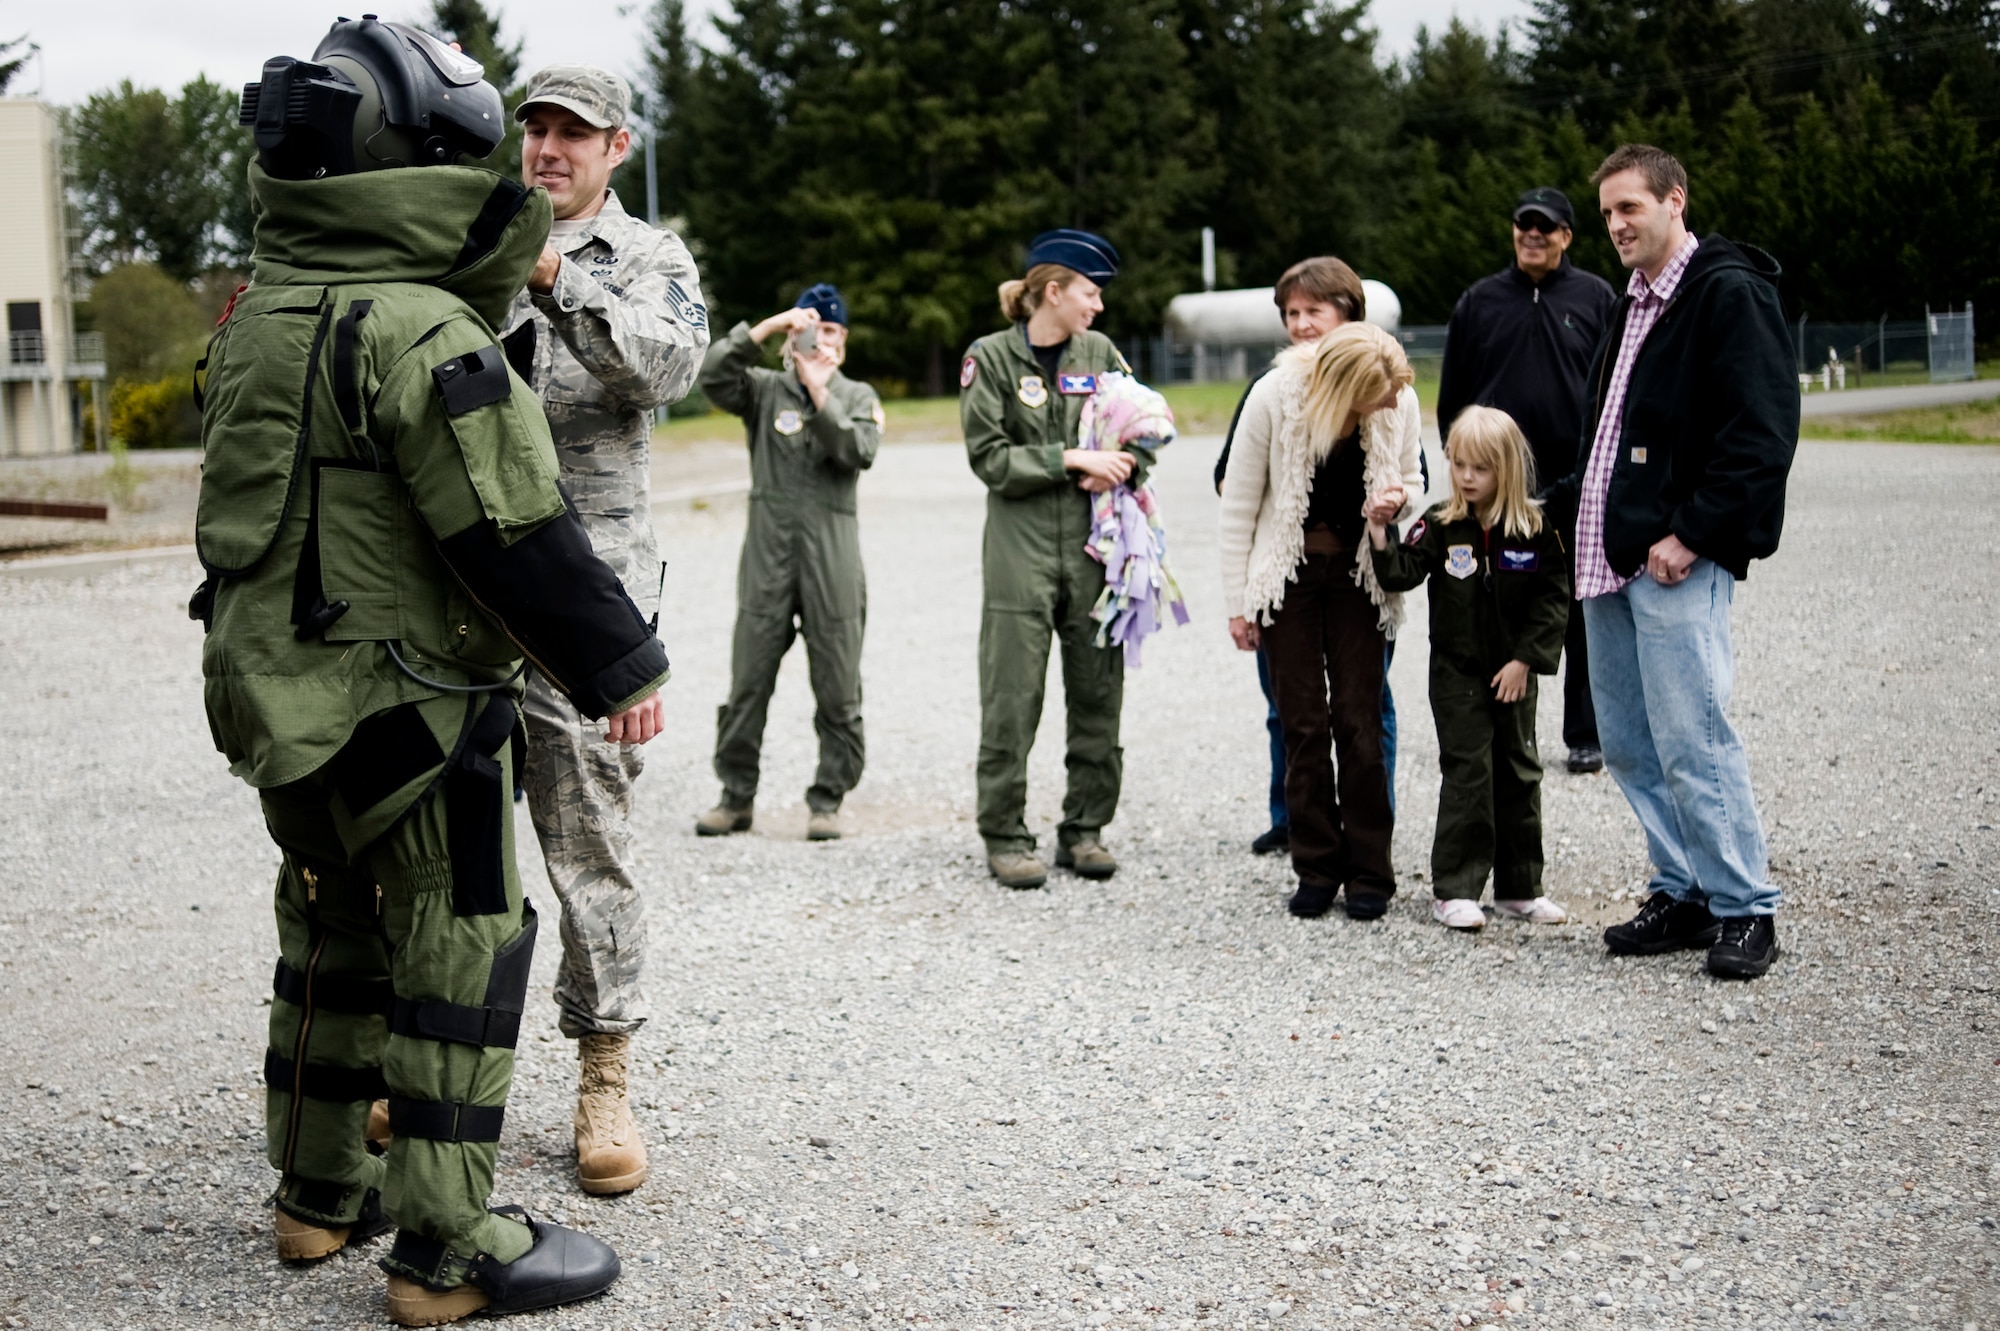 Pilot for a Day candidate Kaylie Bergen, age 6, and her family look on as Staff Sgt. Mark Walker and Airman 1st Class Mark Stafford, 62nd Civil Engineer Squadron, demonstrate the capabilities of an EOD protective bomb suit May 11. (U.S. Air Force Photo by Abner Guzman)

